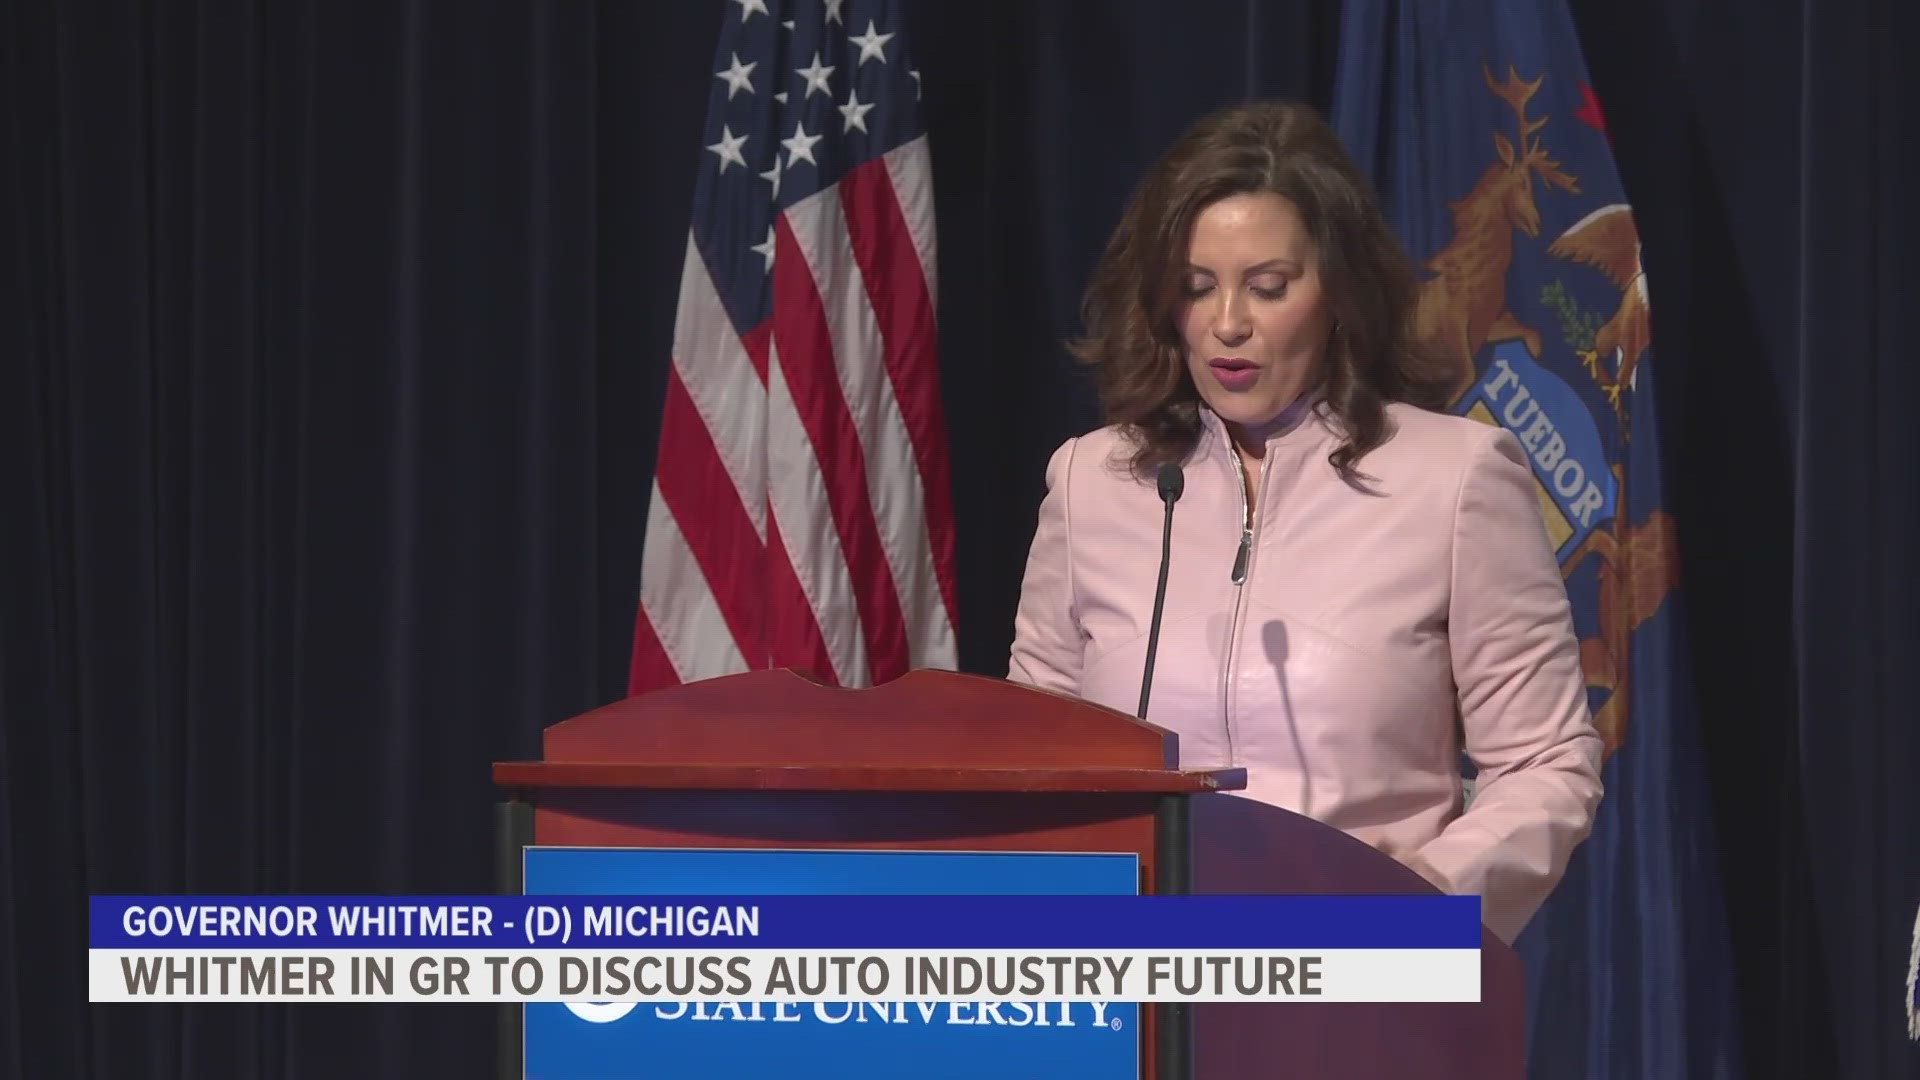 Whitmer spoke at the Automotive Suppliers Symposium at Grand Valley State University on Thursday.